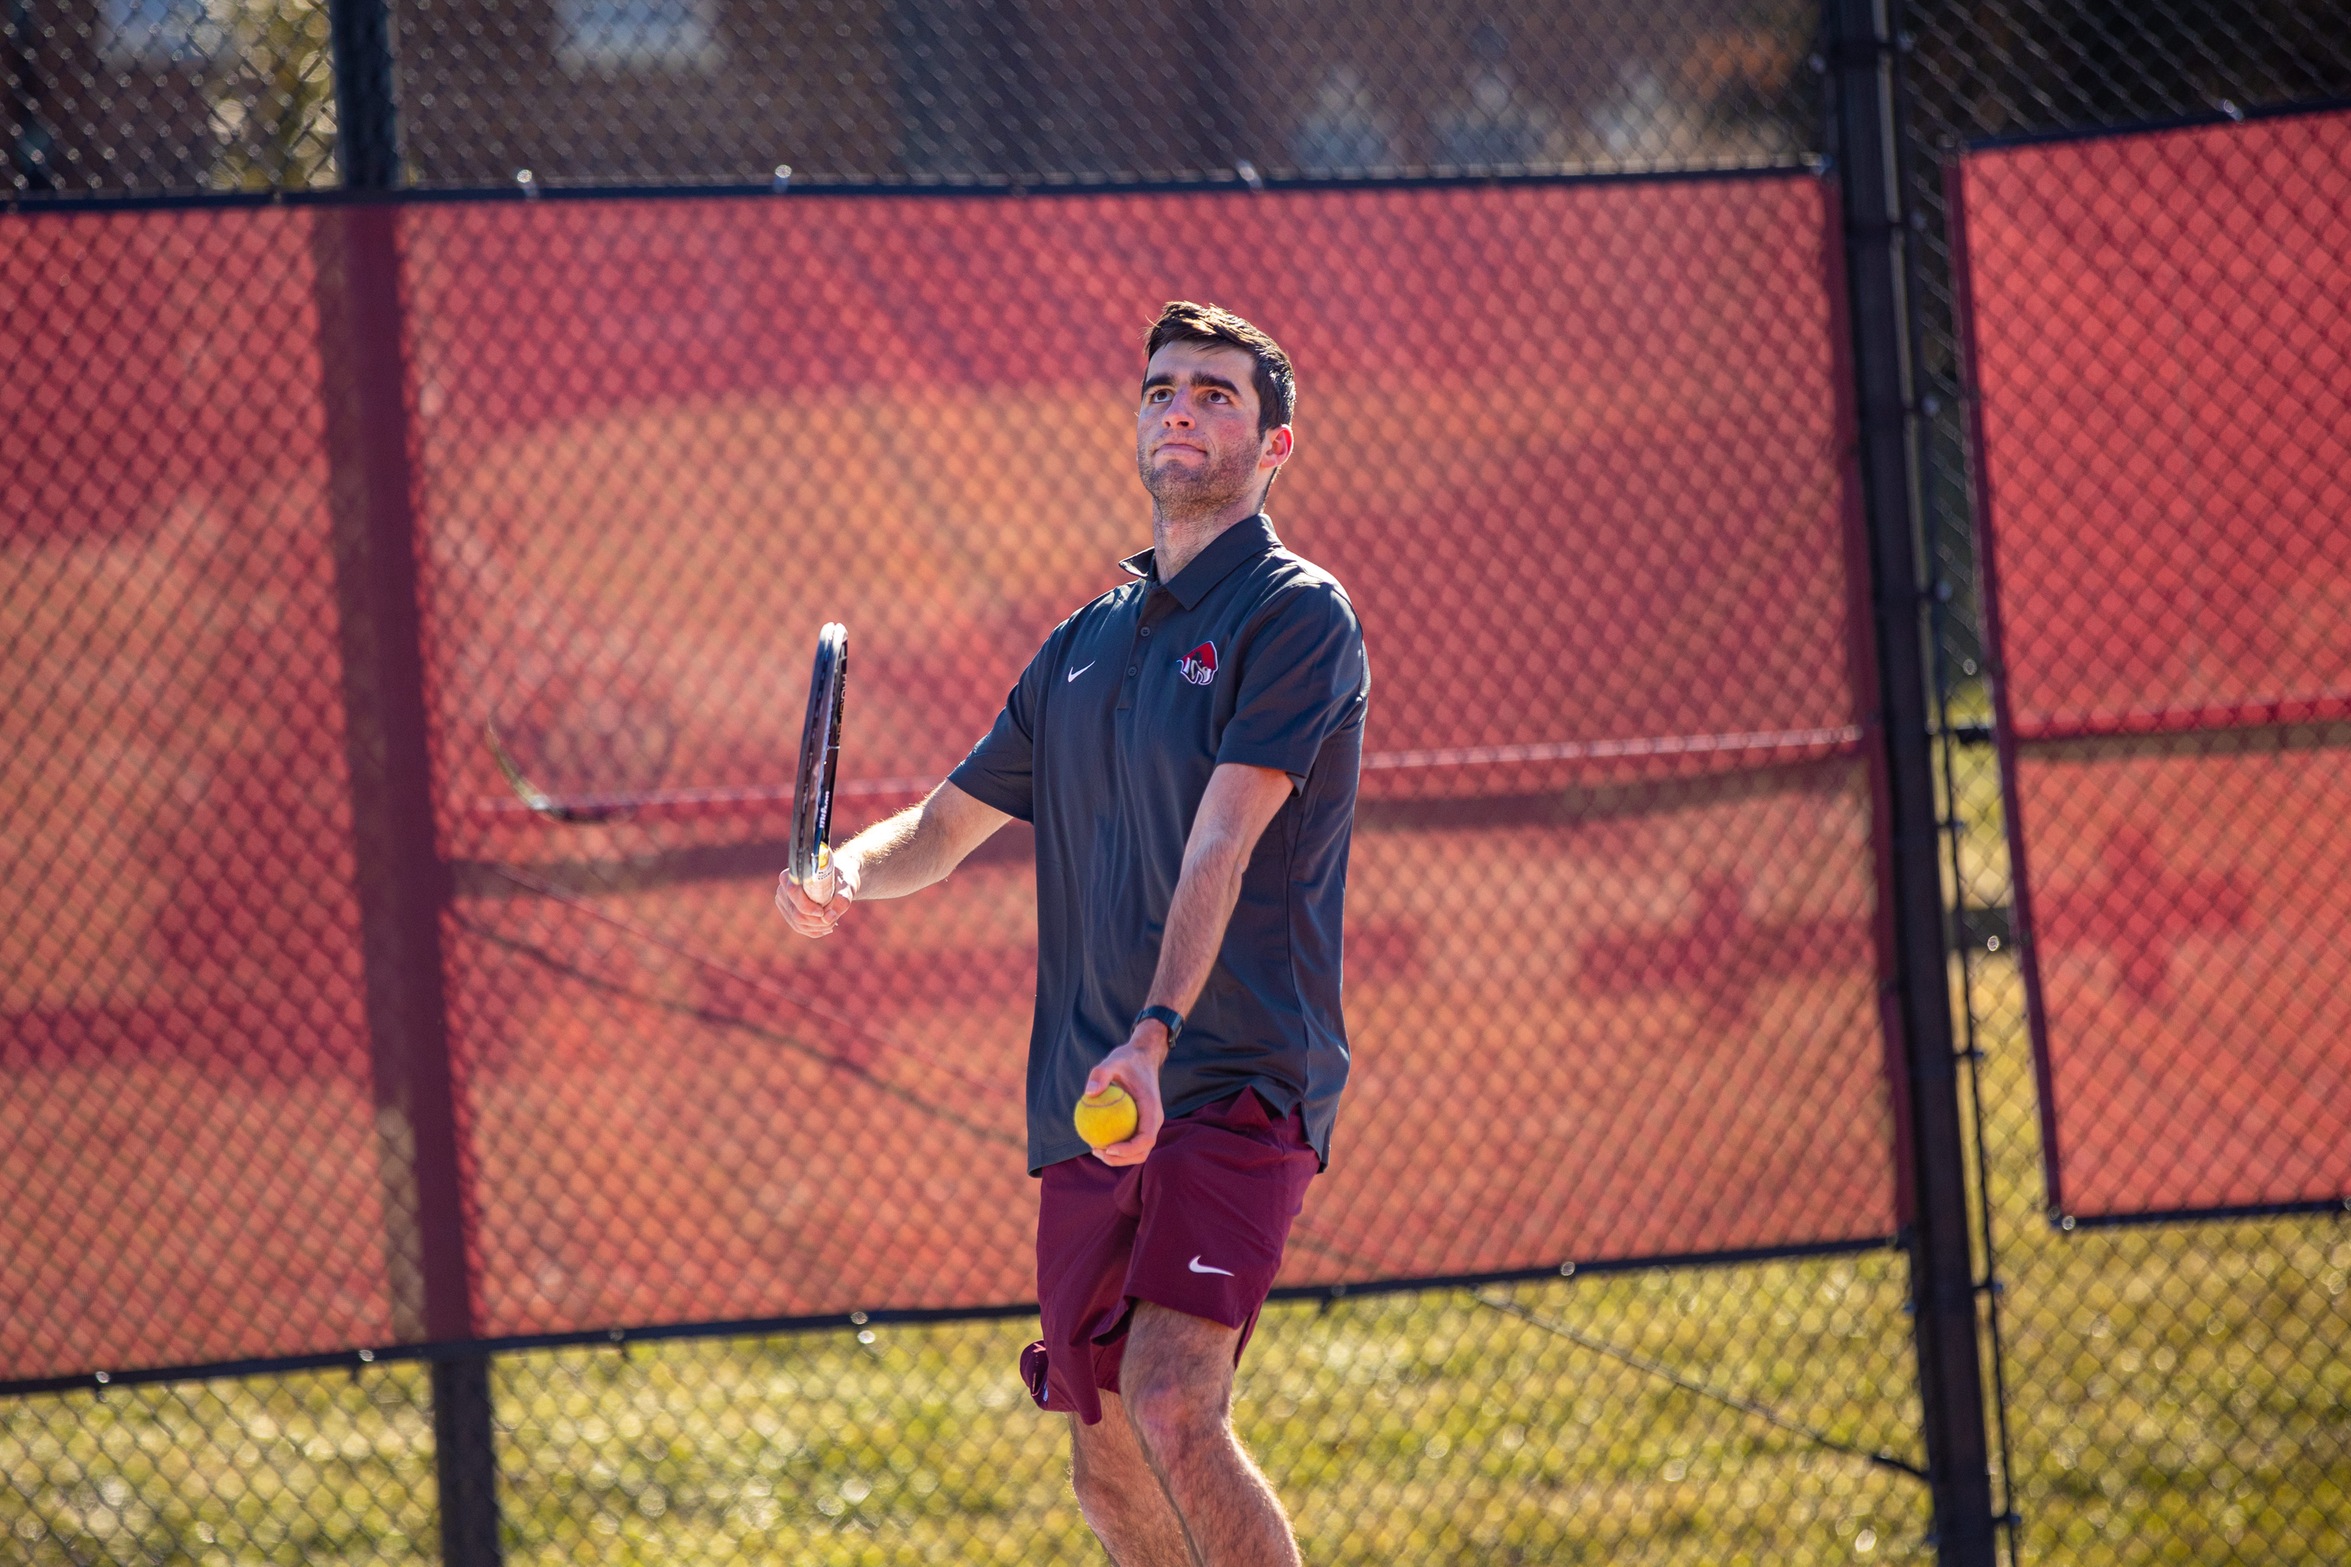 action photo of RC men's tennis player serving